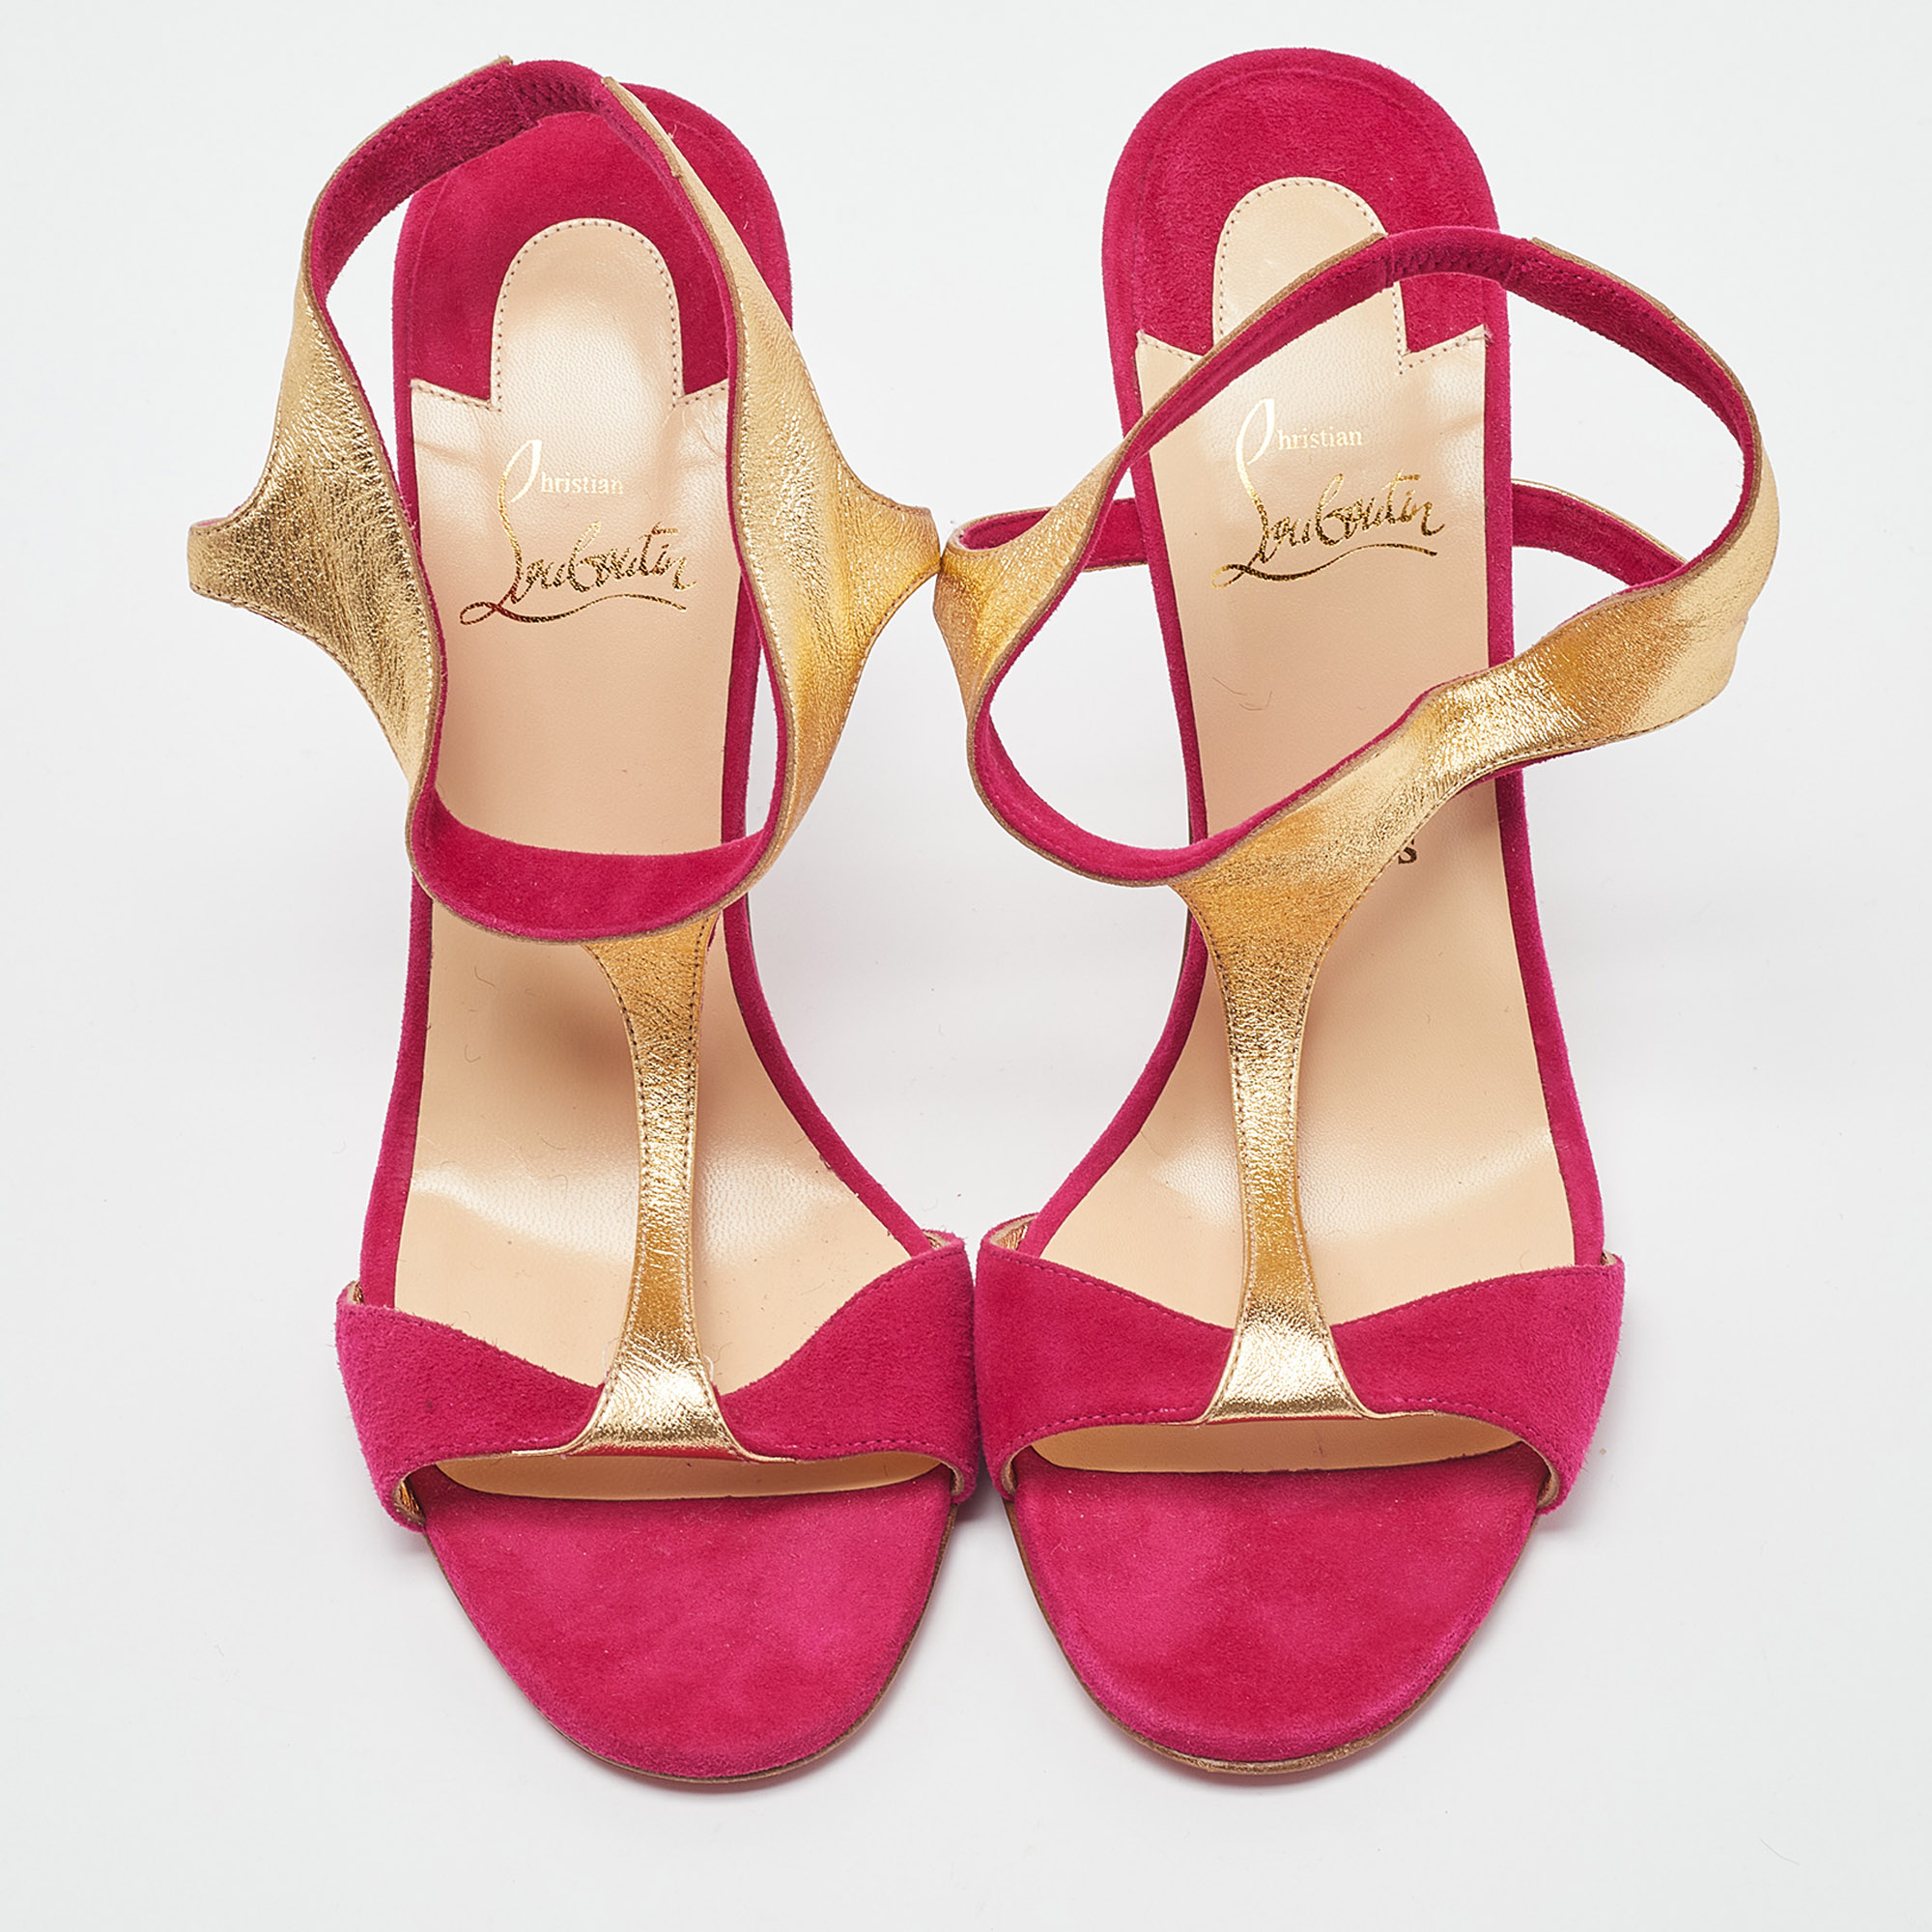 Christian Louboutin Pink/Gold Suede And Leather Morphetina Sandals Size 40.5